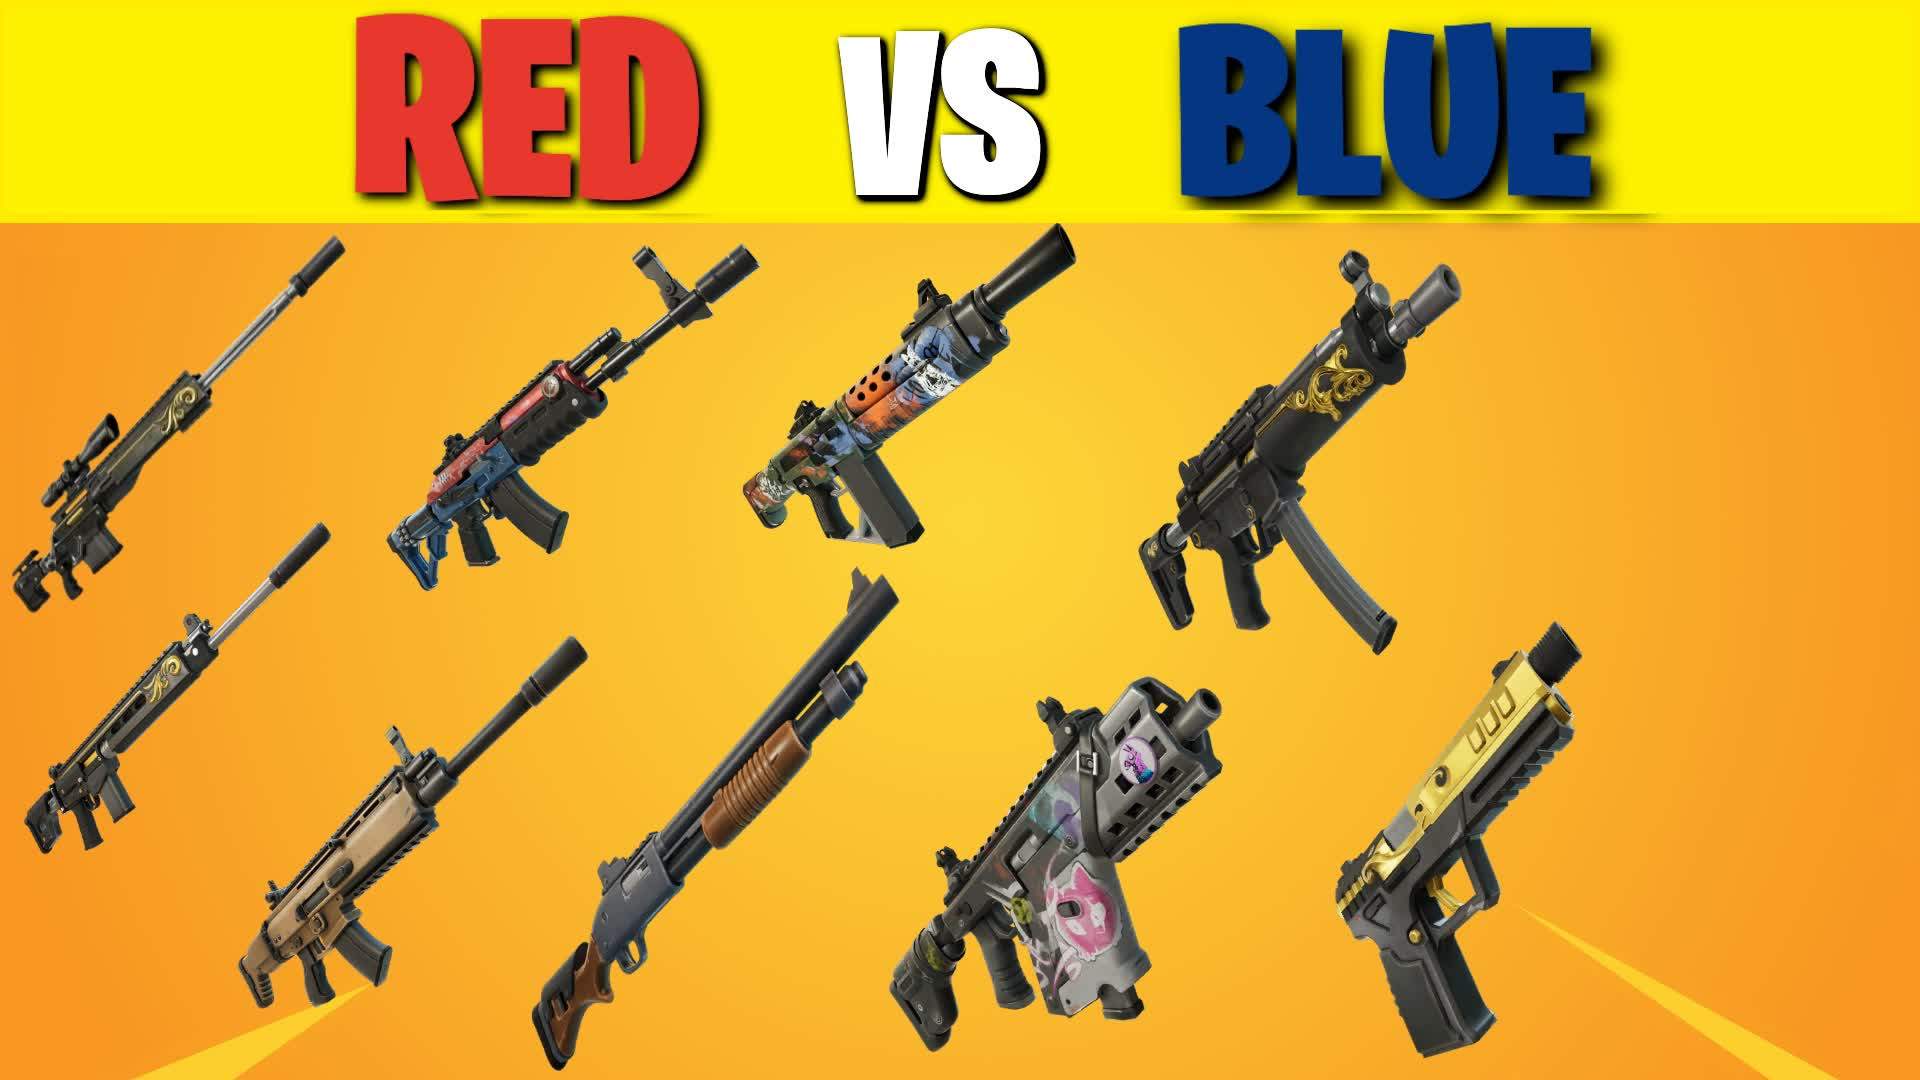 REALLY RED VS BLUE